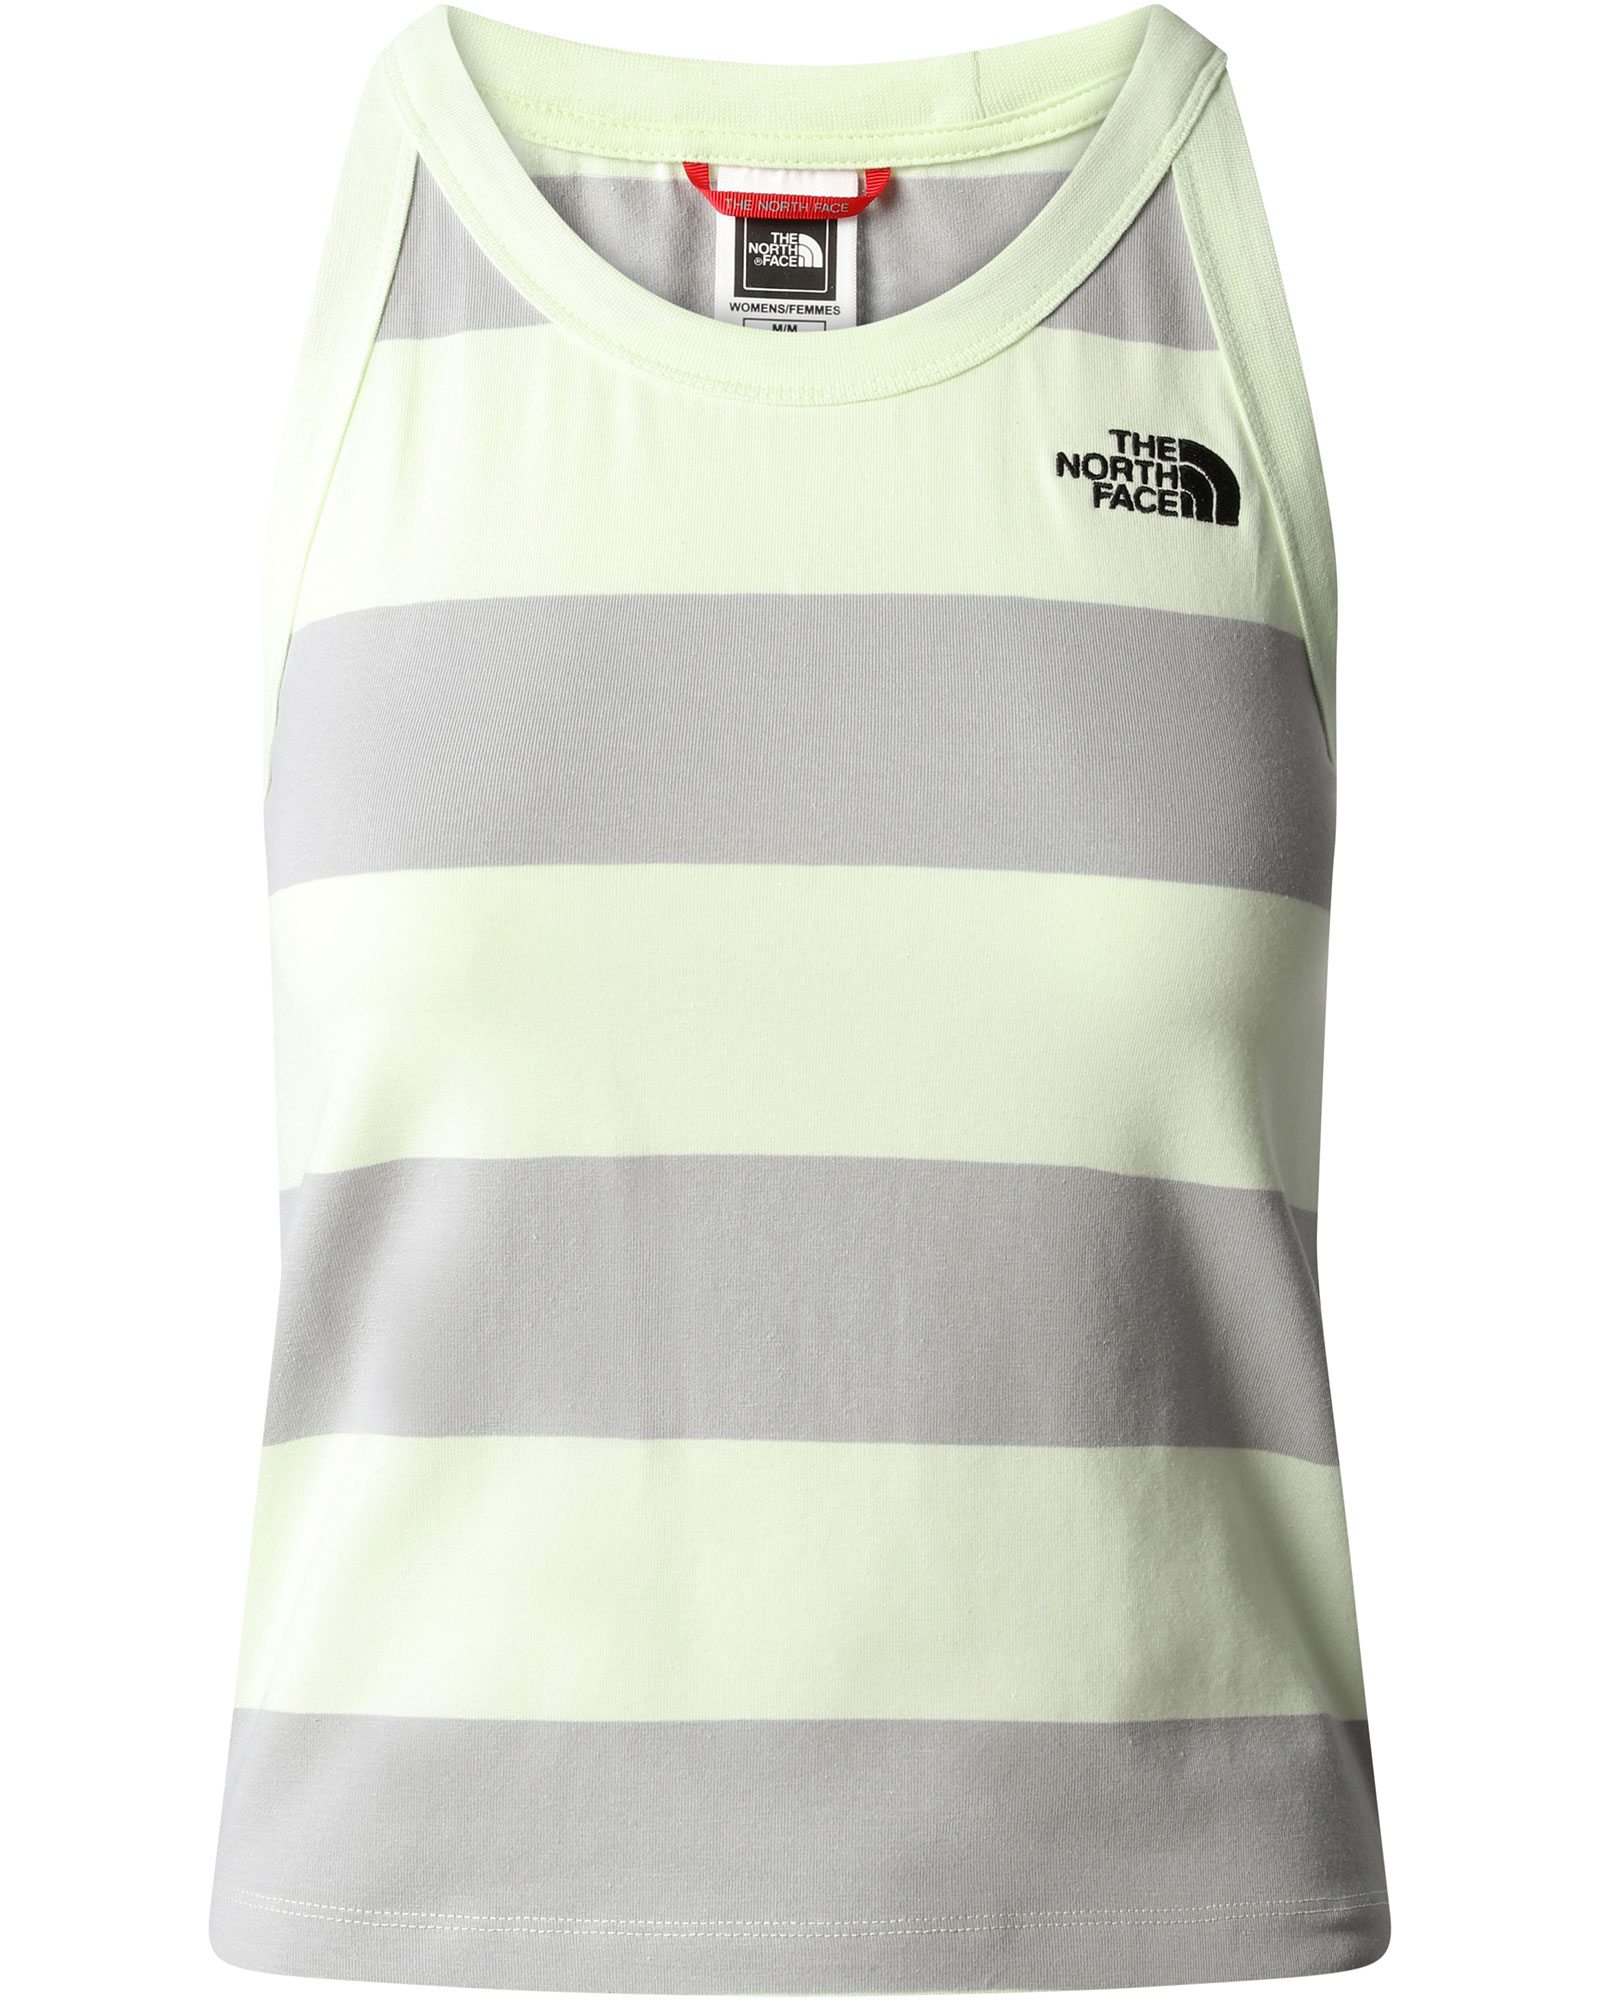 The North Face Women’s Heritage Trend Logowear - Lime Cream L